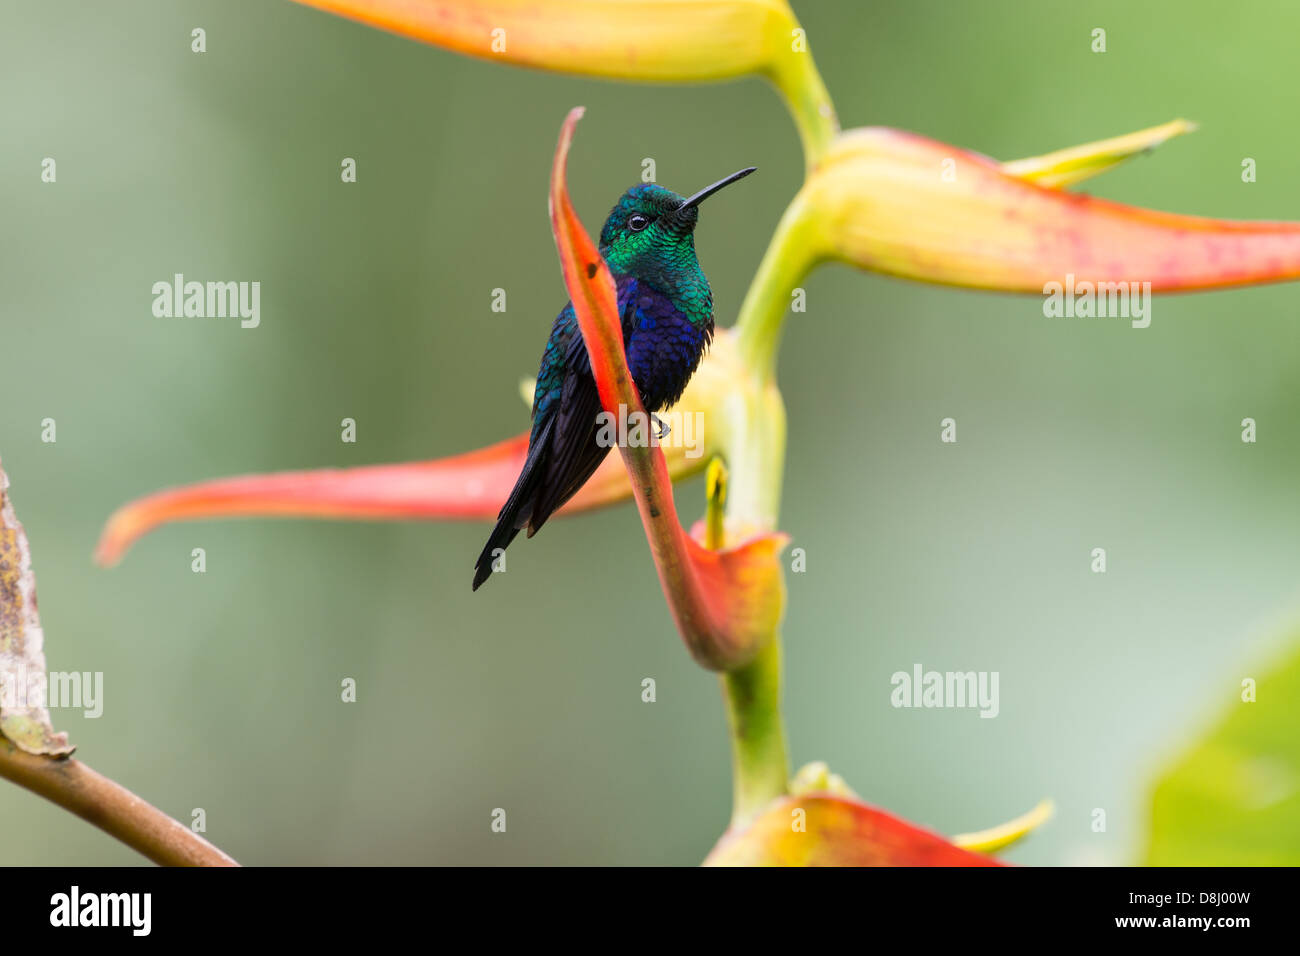 Stock photo of a velvet-purple coronet sitting on a bird of paradise flower in the cloud forest, Ecuador. Stock Photo